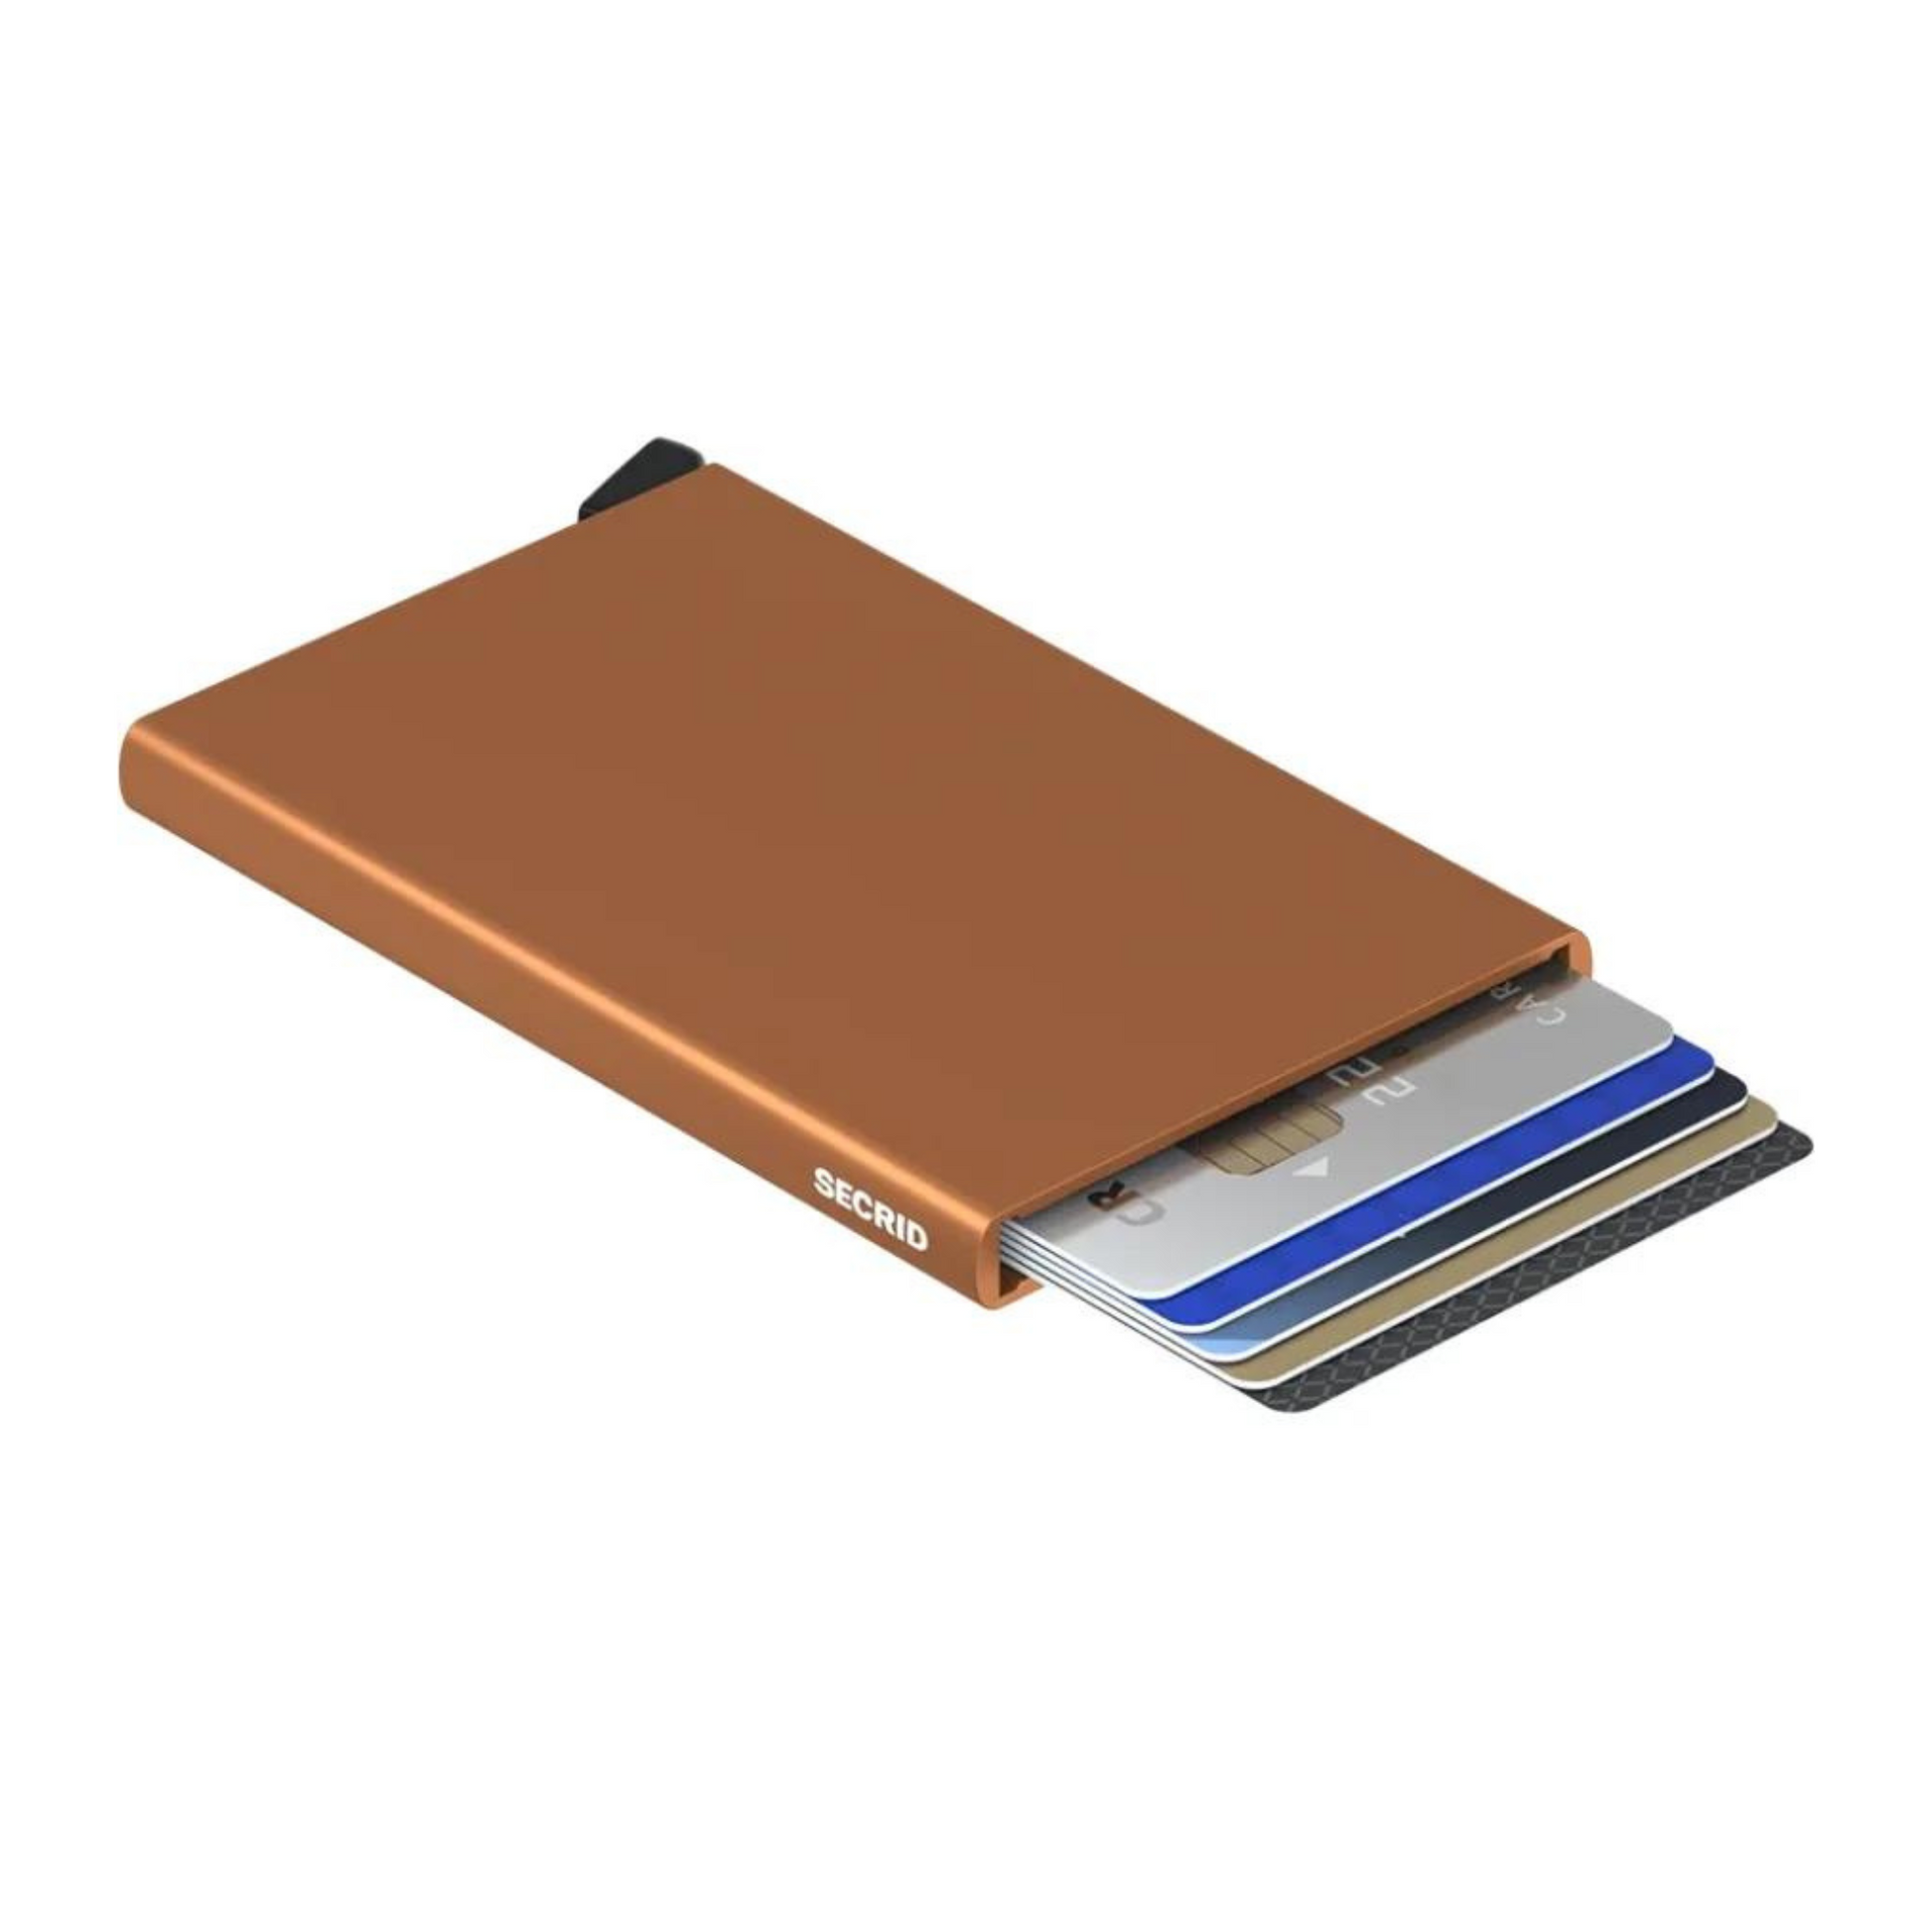 Metallic light brown wallet is laying on its side with 6 cards shown in the holder. It has a black bottom tab and small white logo on side.